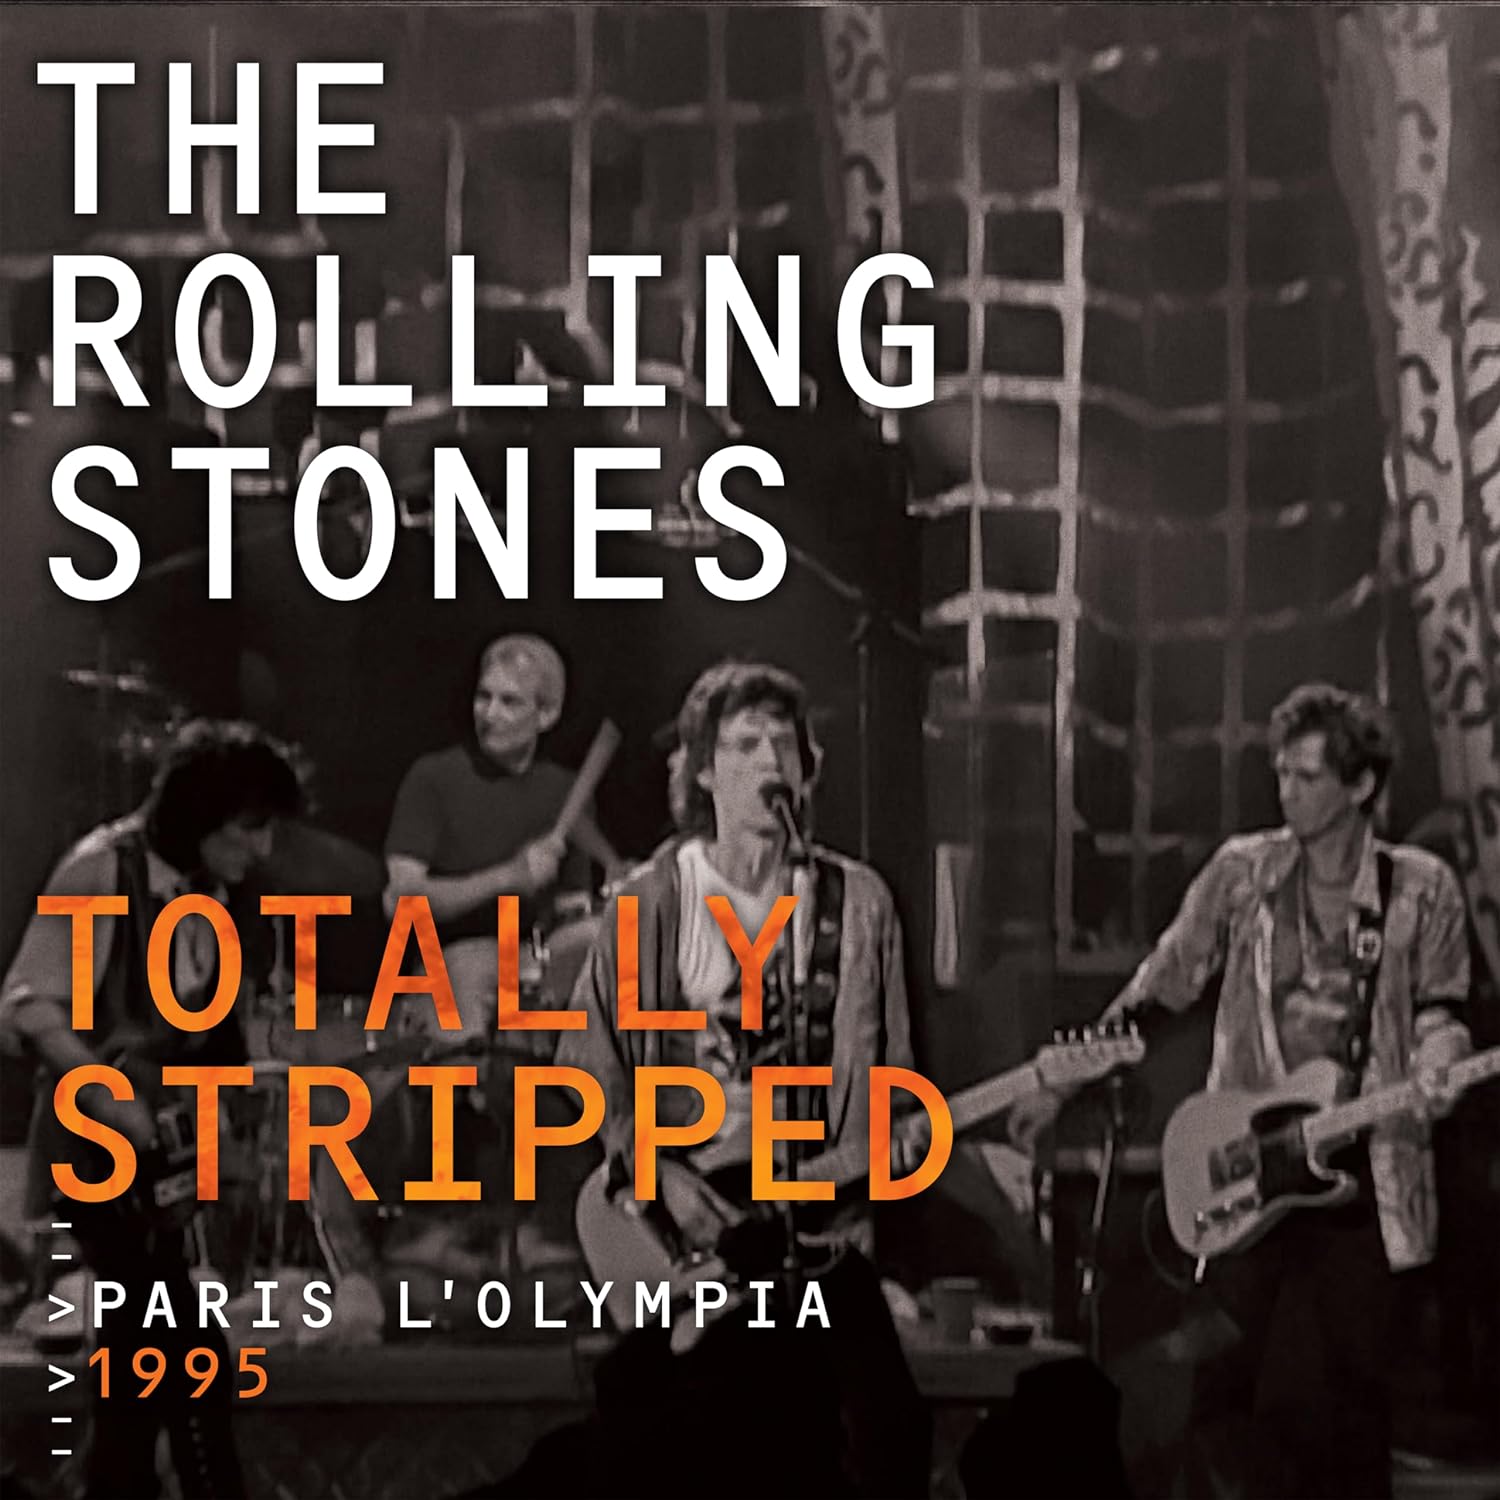 affiche du film The Rolling Stones - Totally Stripped - Paris L'Olympia - 1995